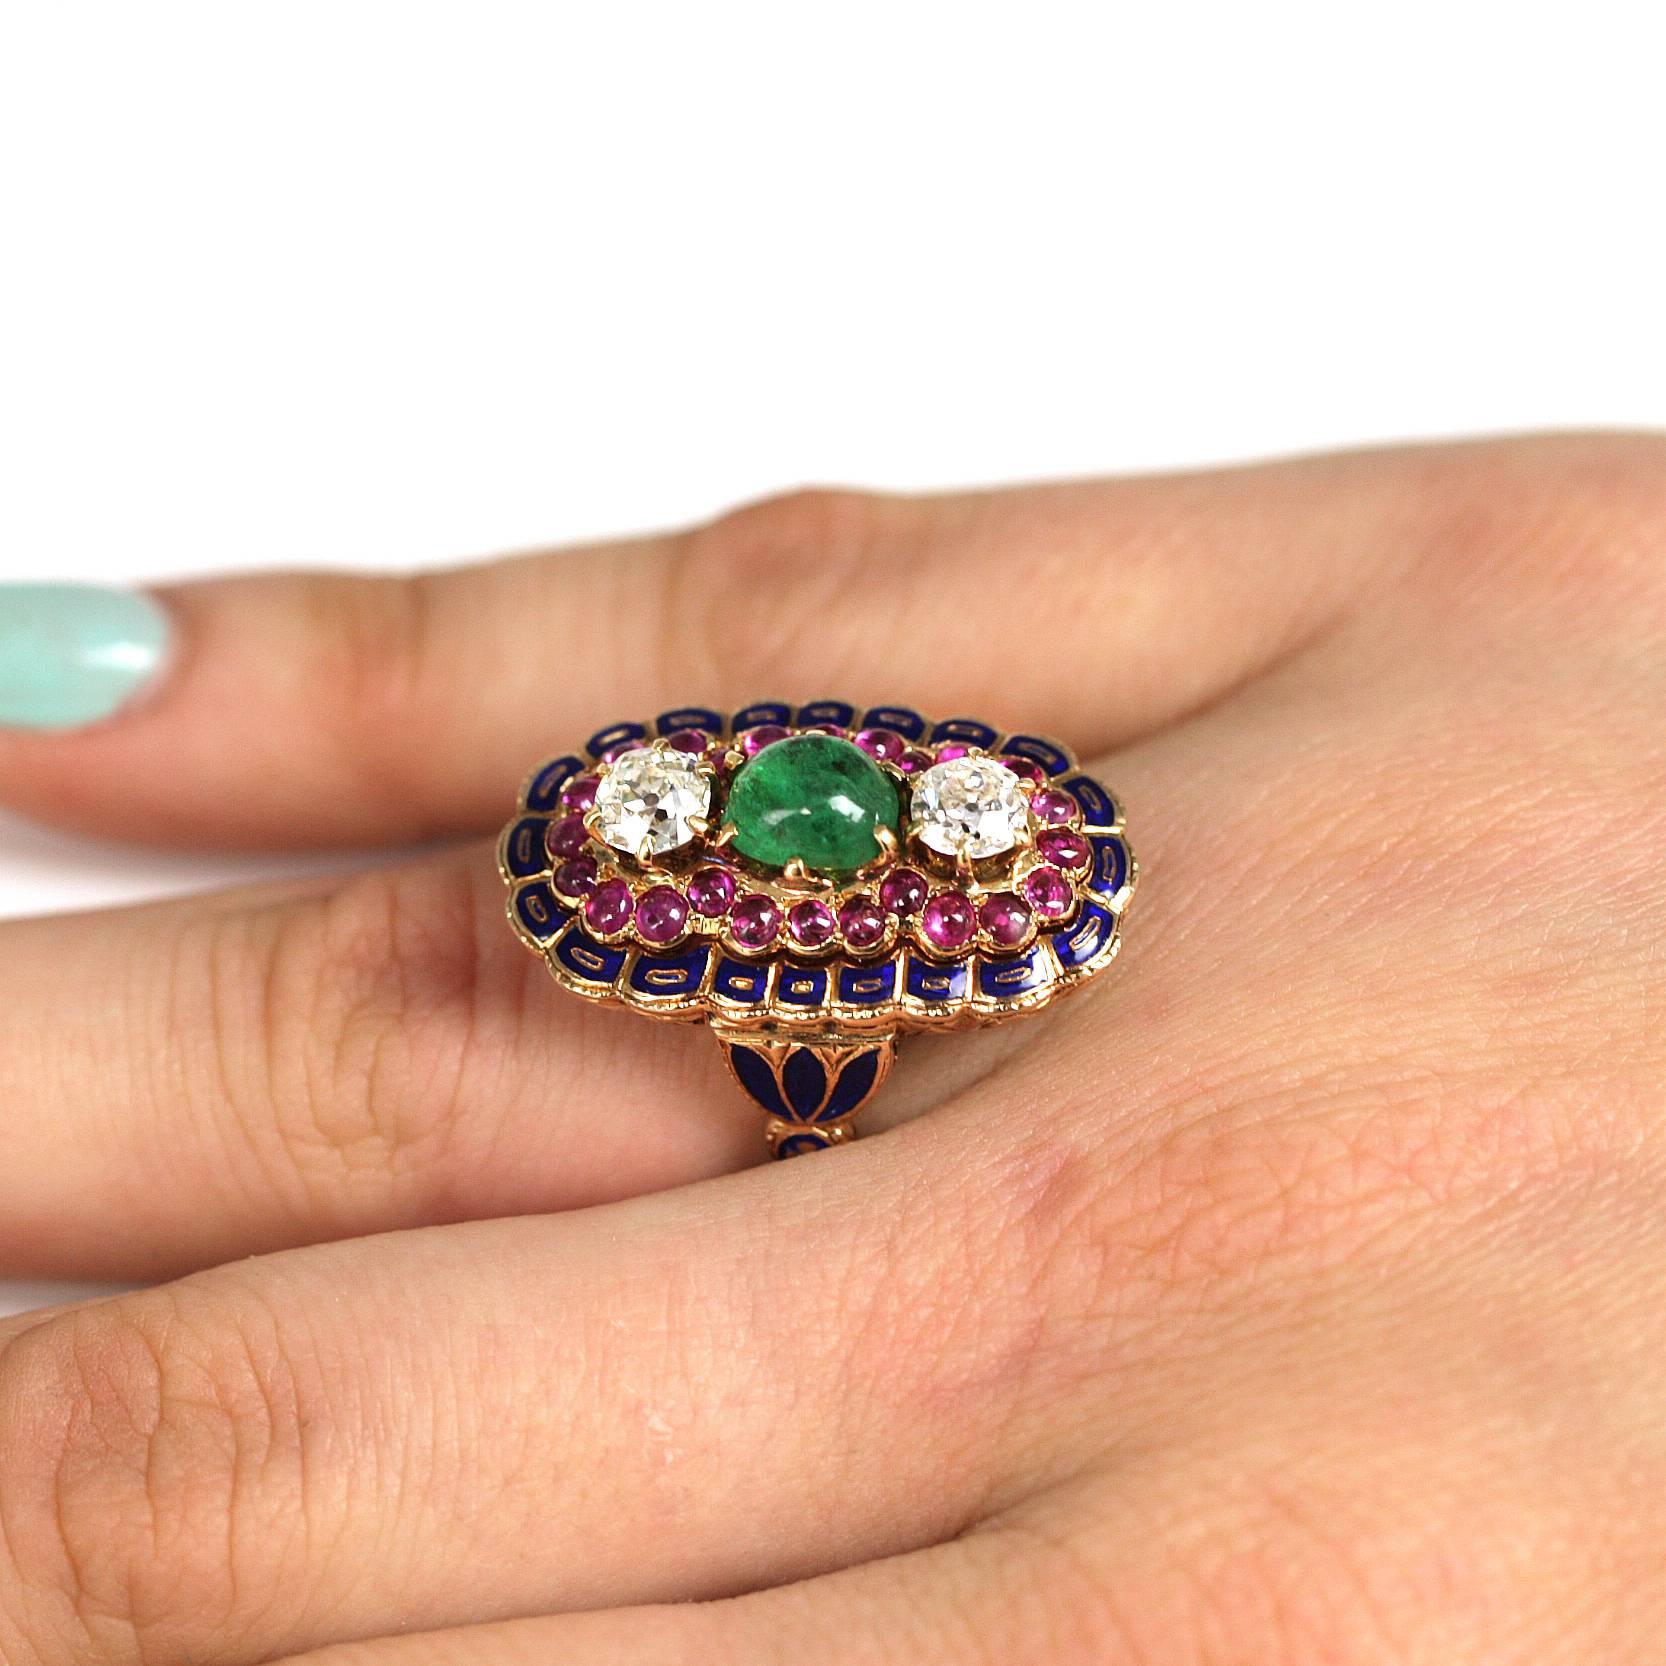 The 18 karat ring consist of  2 old mine diamonds weighing approximately 1.30 carats, J /K  in color and SI in clarity. The ruby and emerald have an approximate total weight of .75 carats. The is ring finished with with a fine  detailed blue enamel